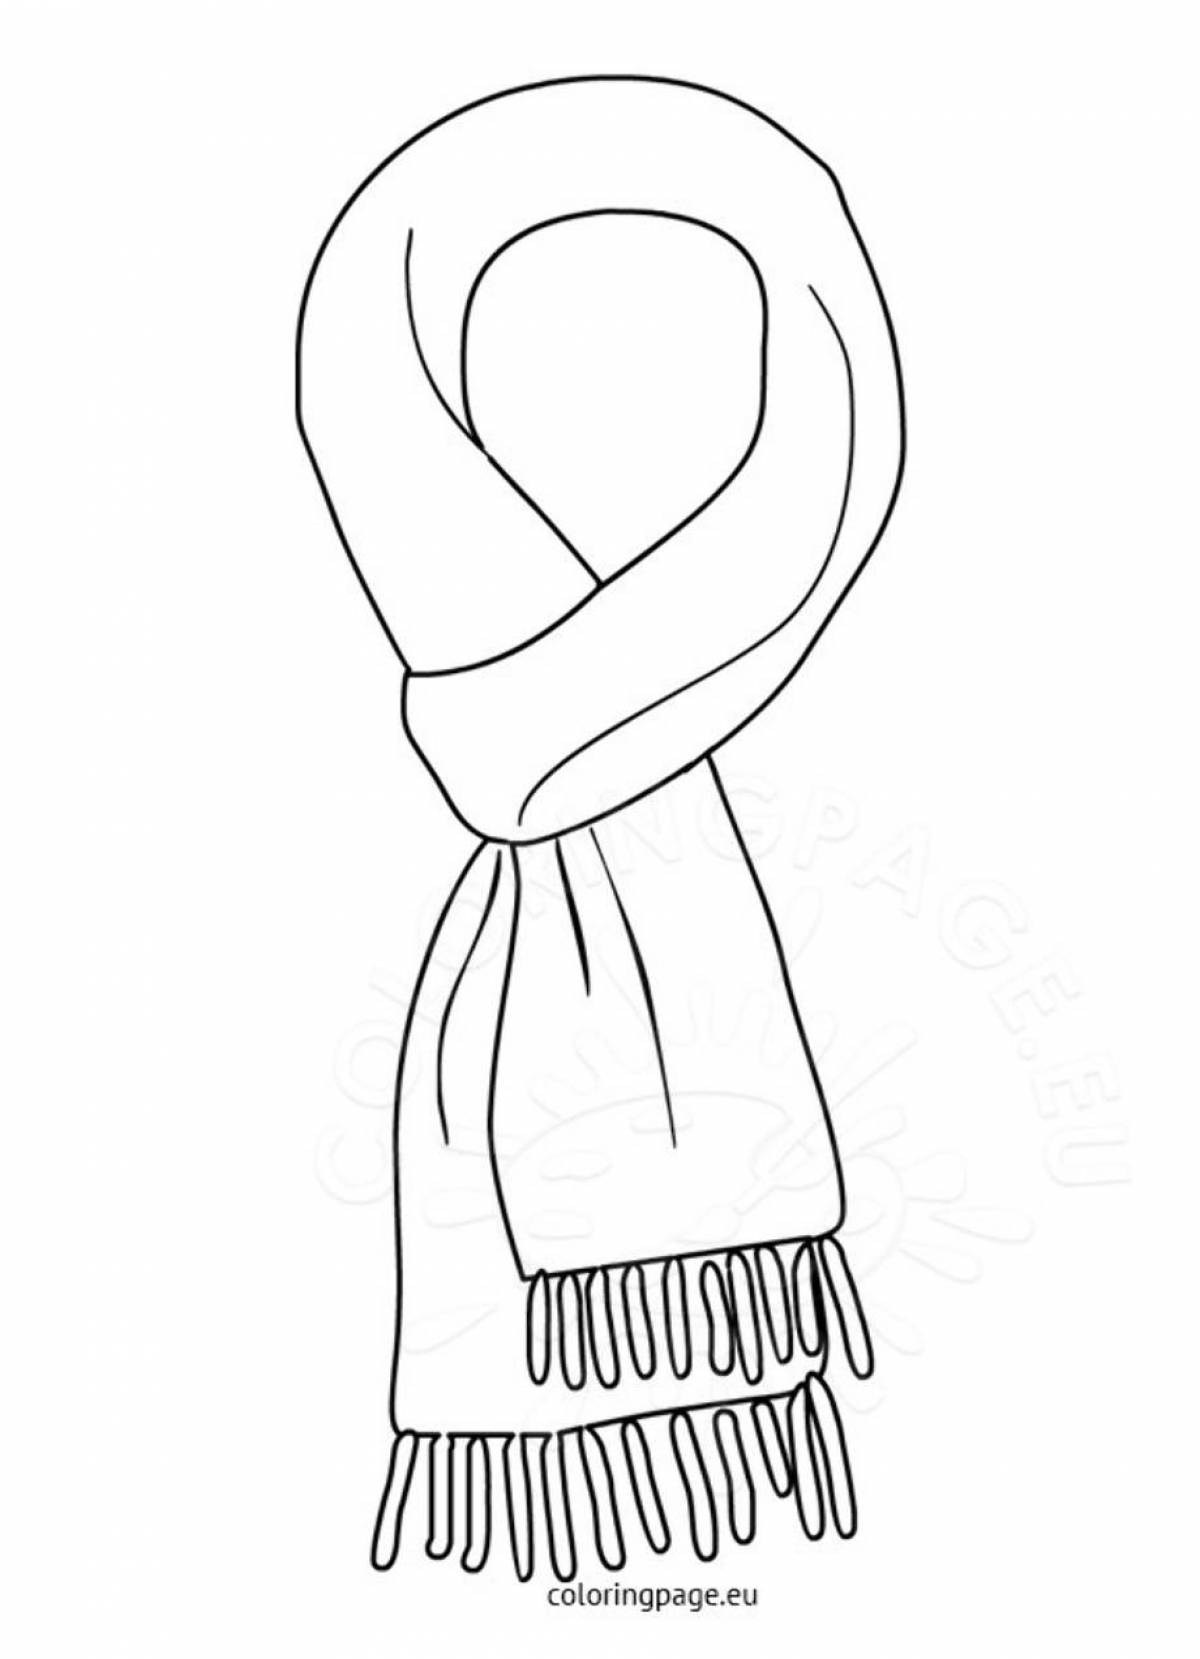 Coloring page charming scarf